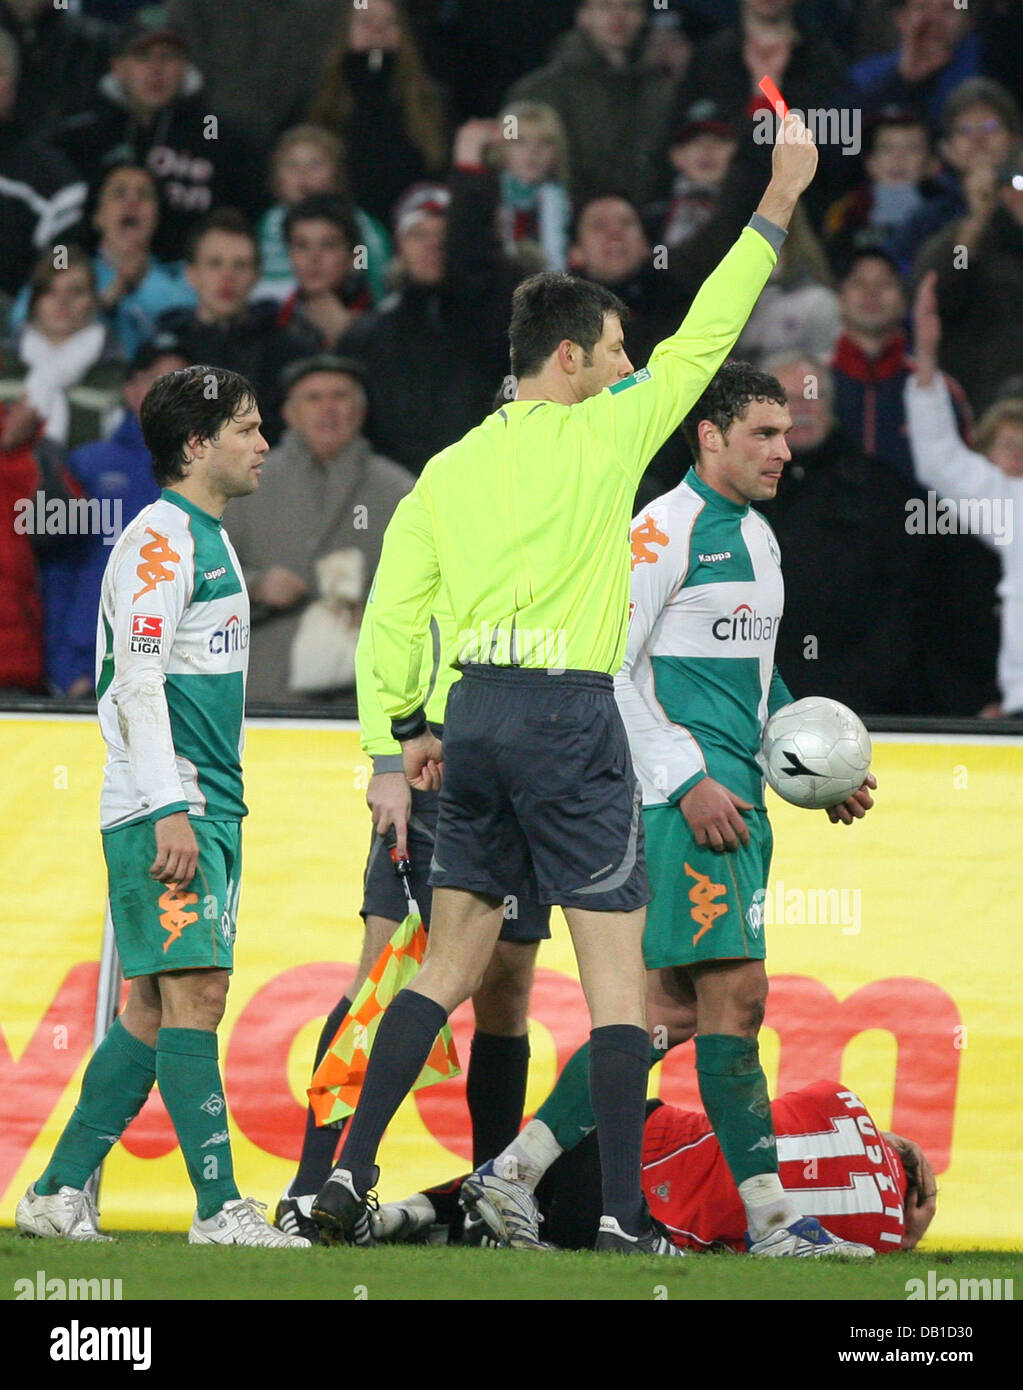 Referee Wolfgang Stark (C) shows Hugo Almeida (not in the picture) of Bremen the red card during the Bundesliga match Hanover 96 vs Werder Bremen at AWD-Arena stadium in Hanover, Germany, 08 December 2007. Diego (L) and Dusko Tosic of Bremen watch the scene. Hanover defeated Bremen 4-3. Photo: Friso Gentsch Stock Photo